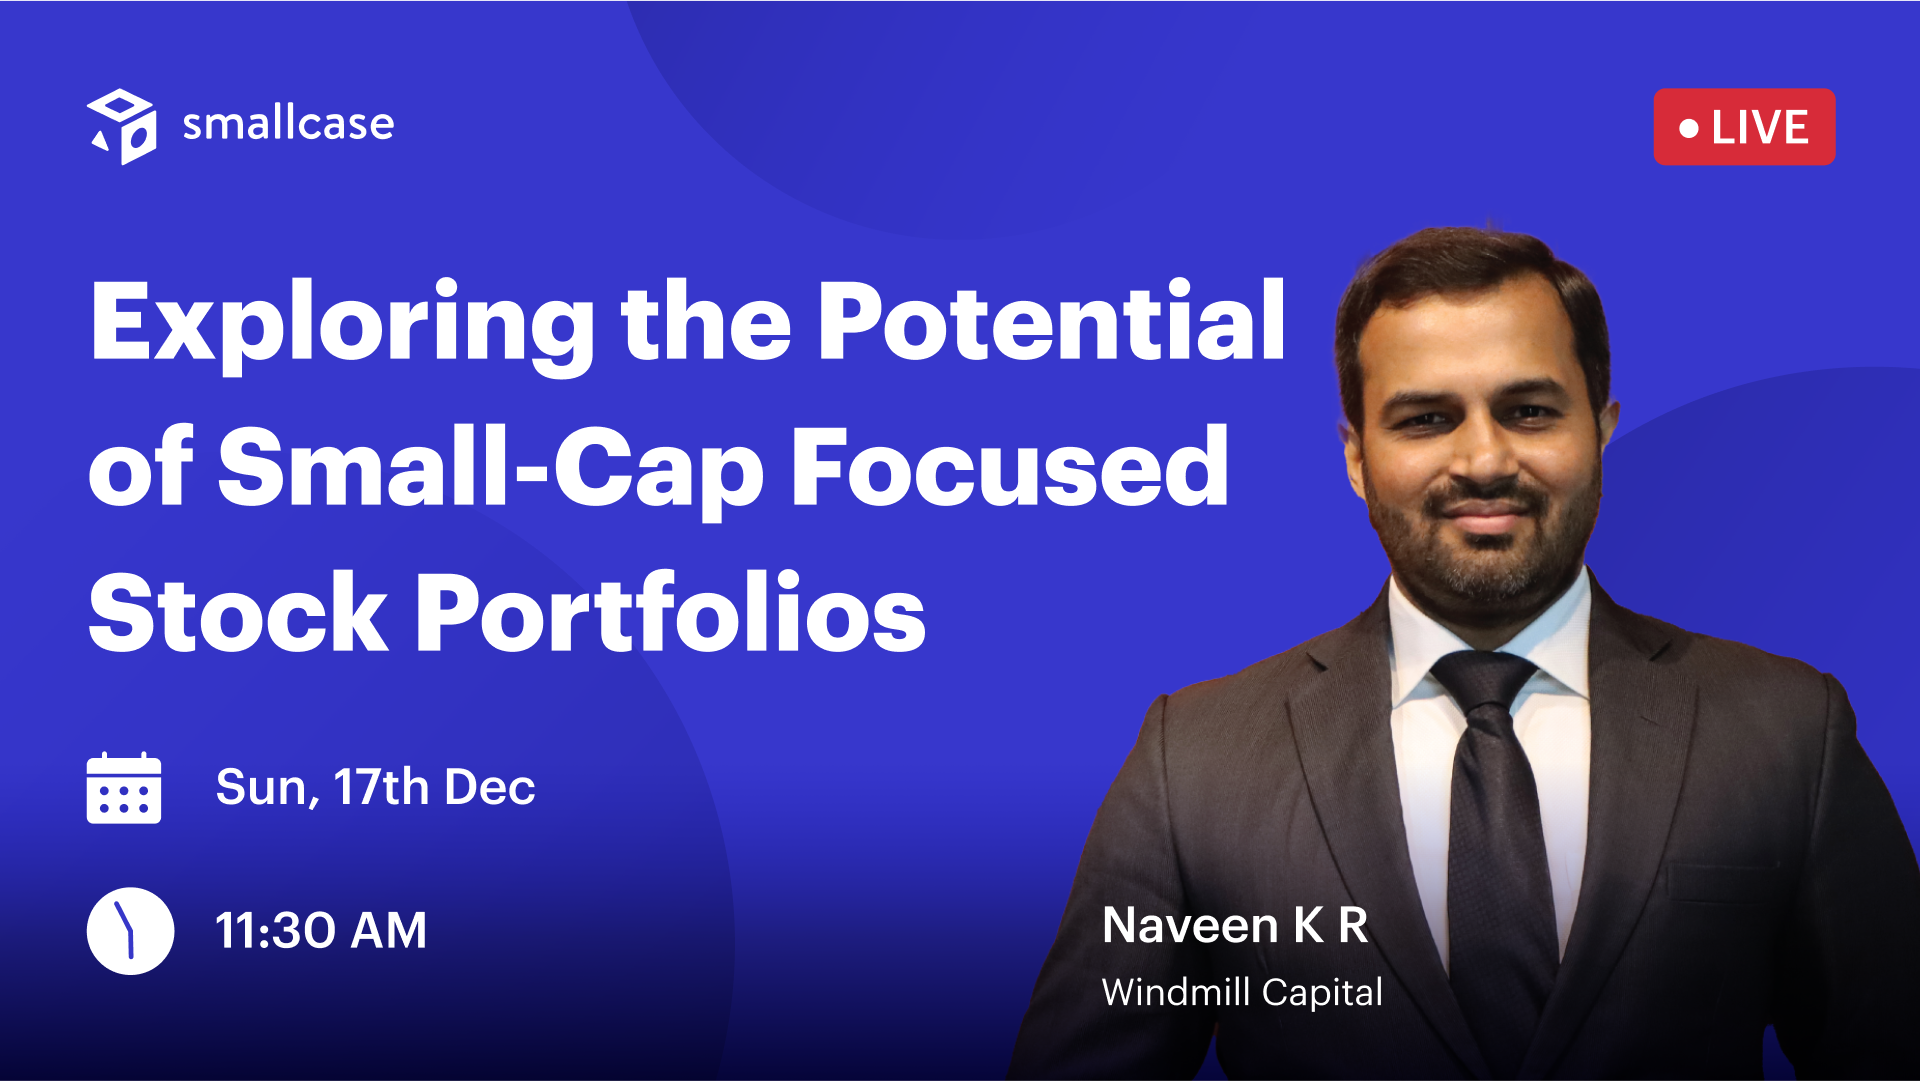 Explore The Potential of Small-Cap Focused Portfolios with Windmill Capital 